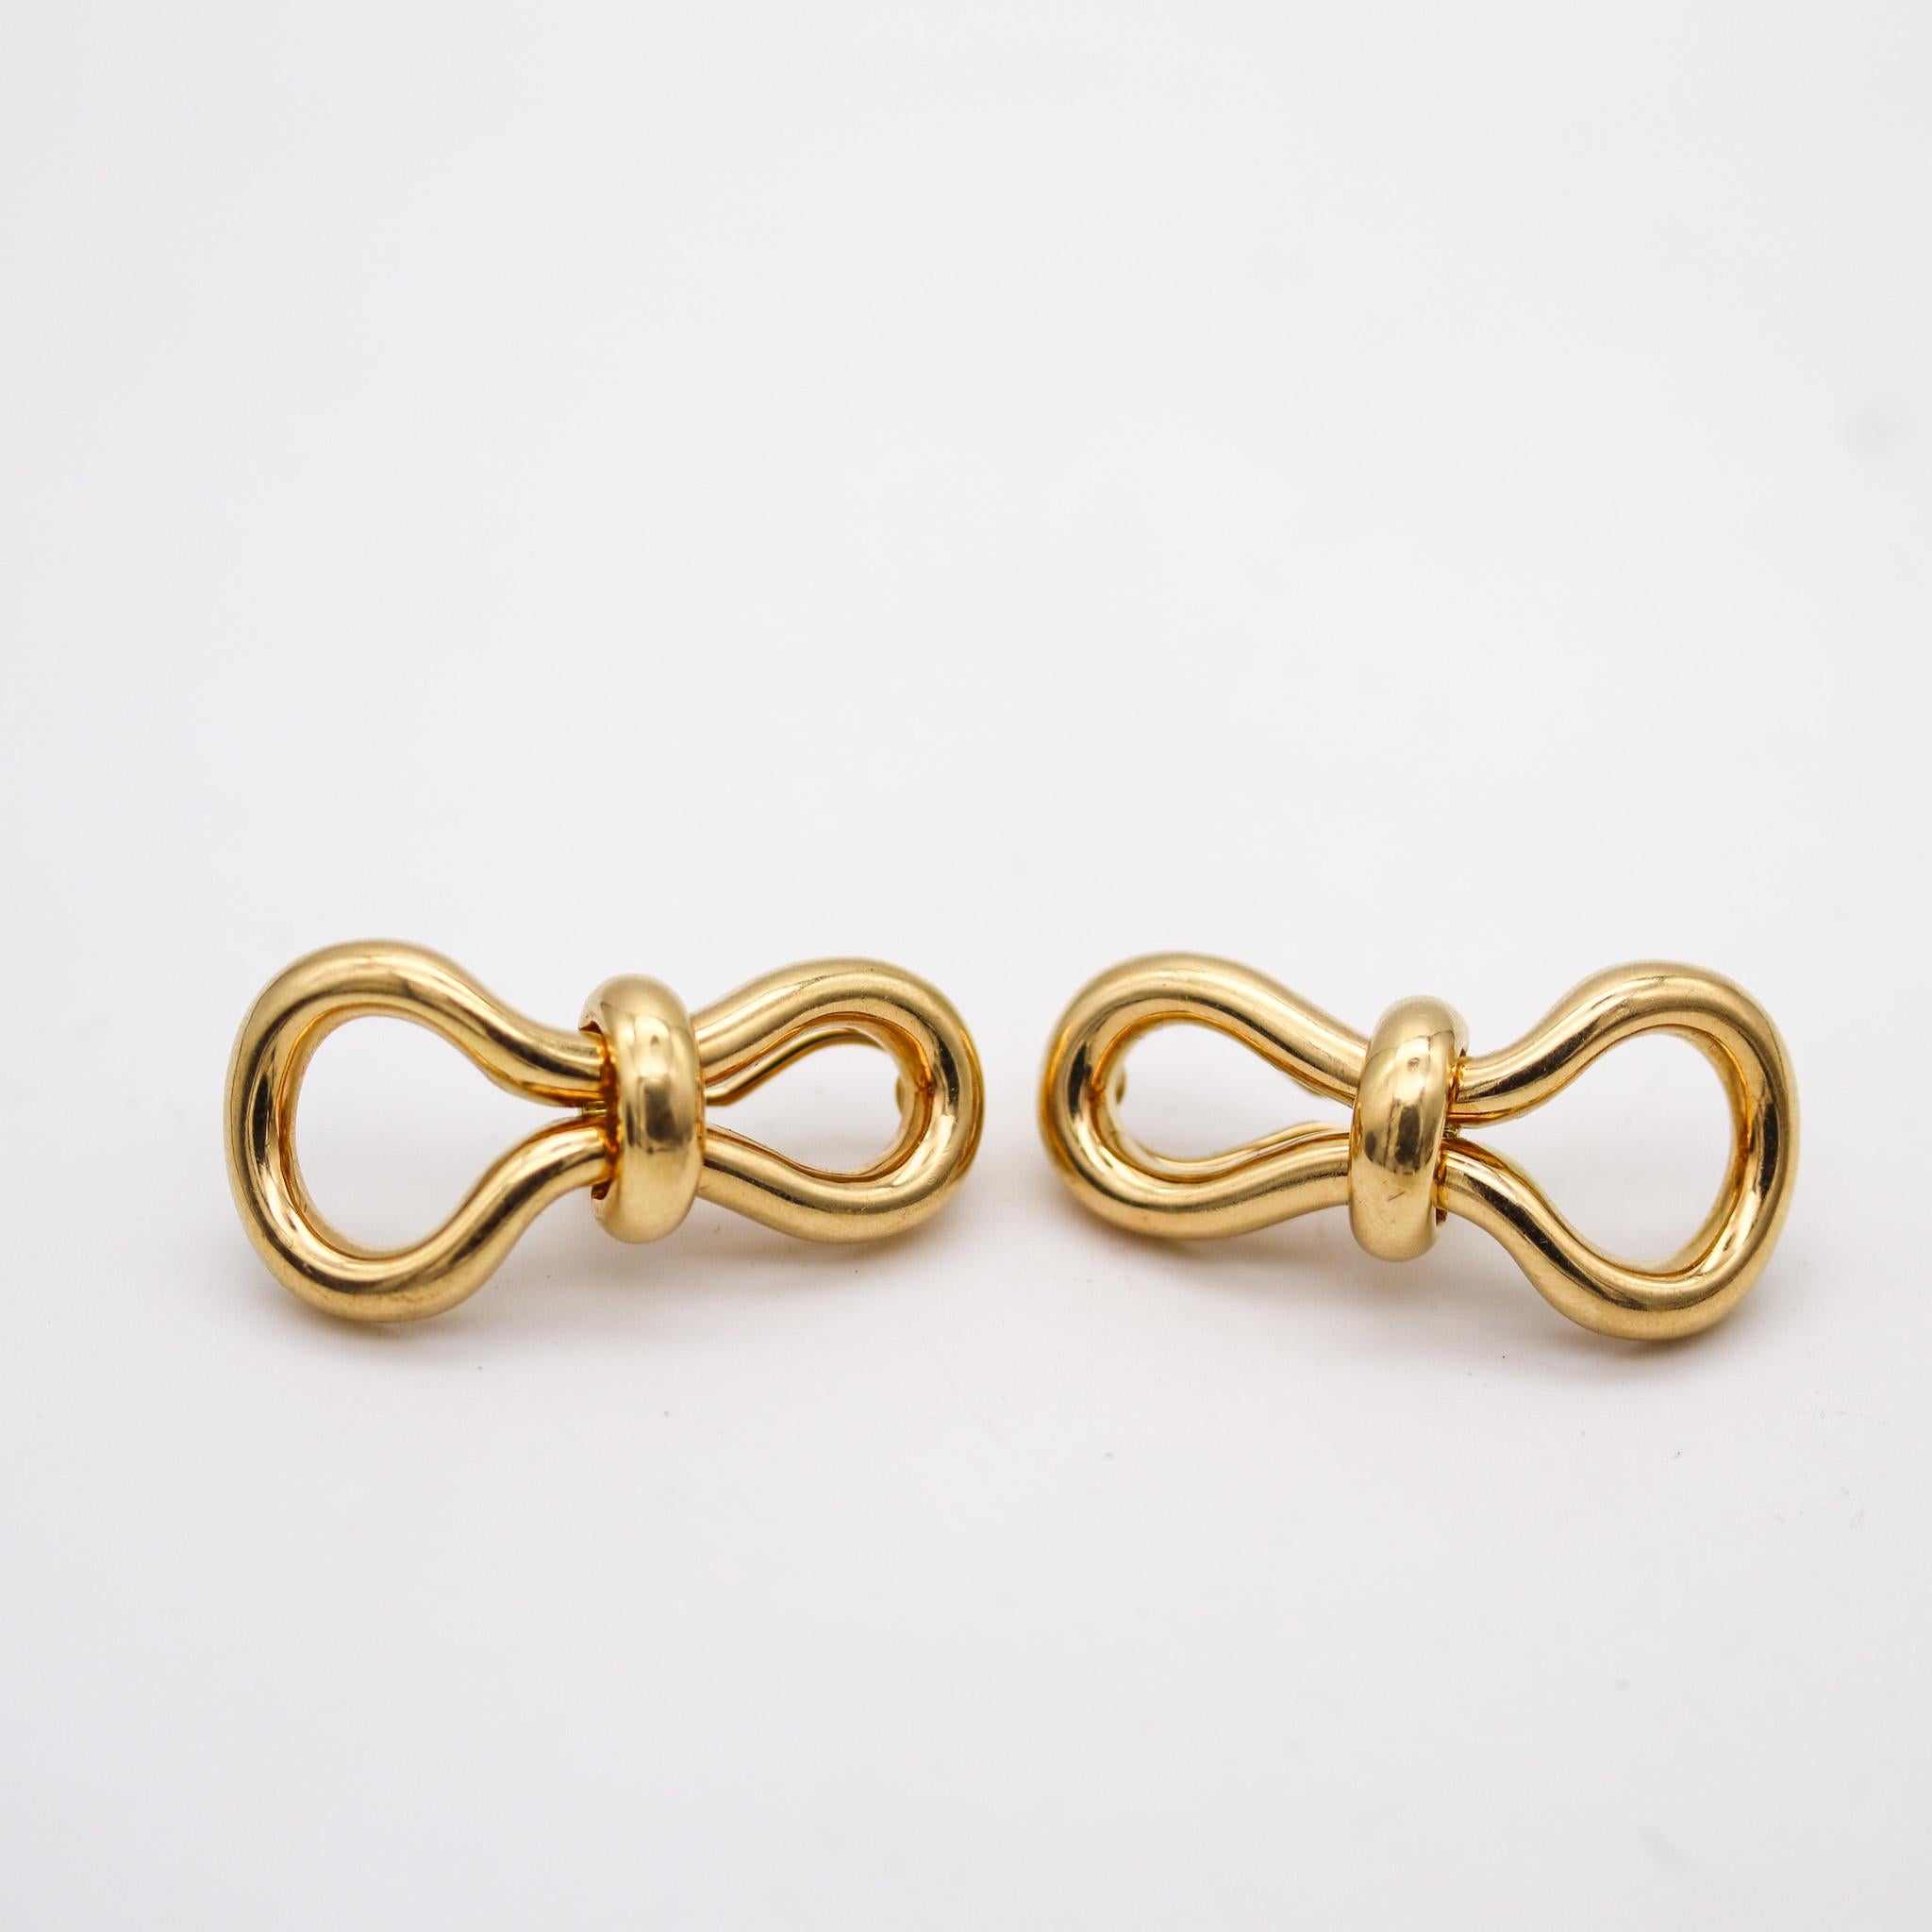 Knots earrings designed by Paloma Picasso for Tiffany & Co.

Gorgeous clip on earrings, created in New York city by Paloma Picasso at the the Tiffany & Co. studios, back in the 1980's. This pair of clip-on earrings are seldom see in the secondary